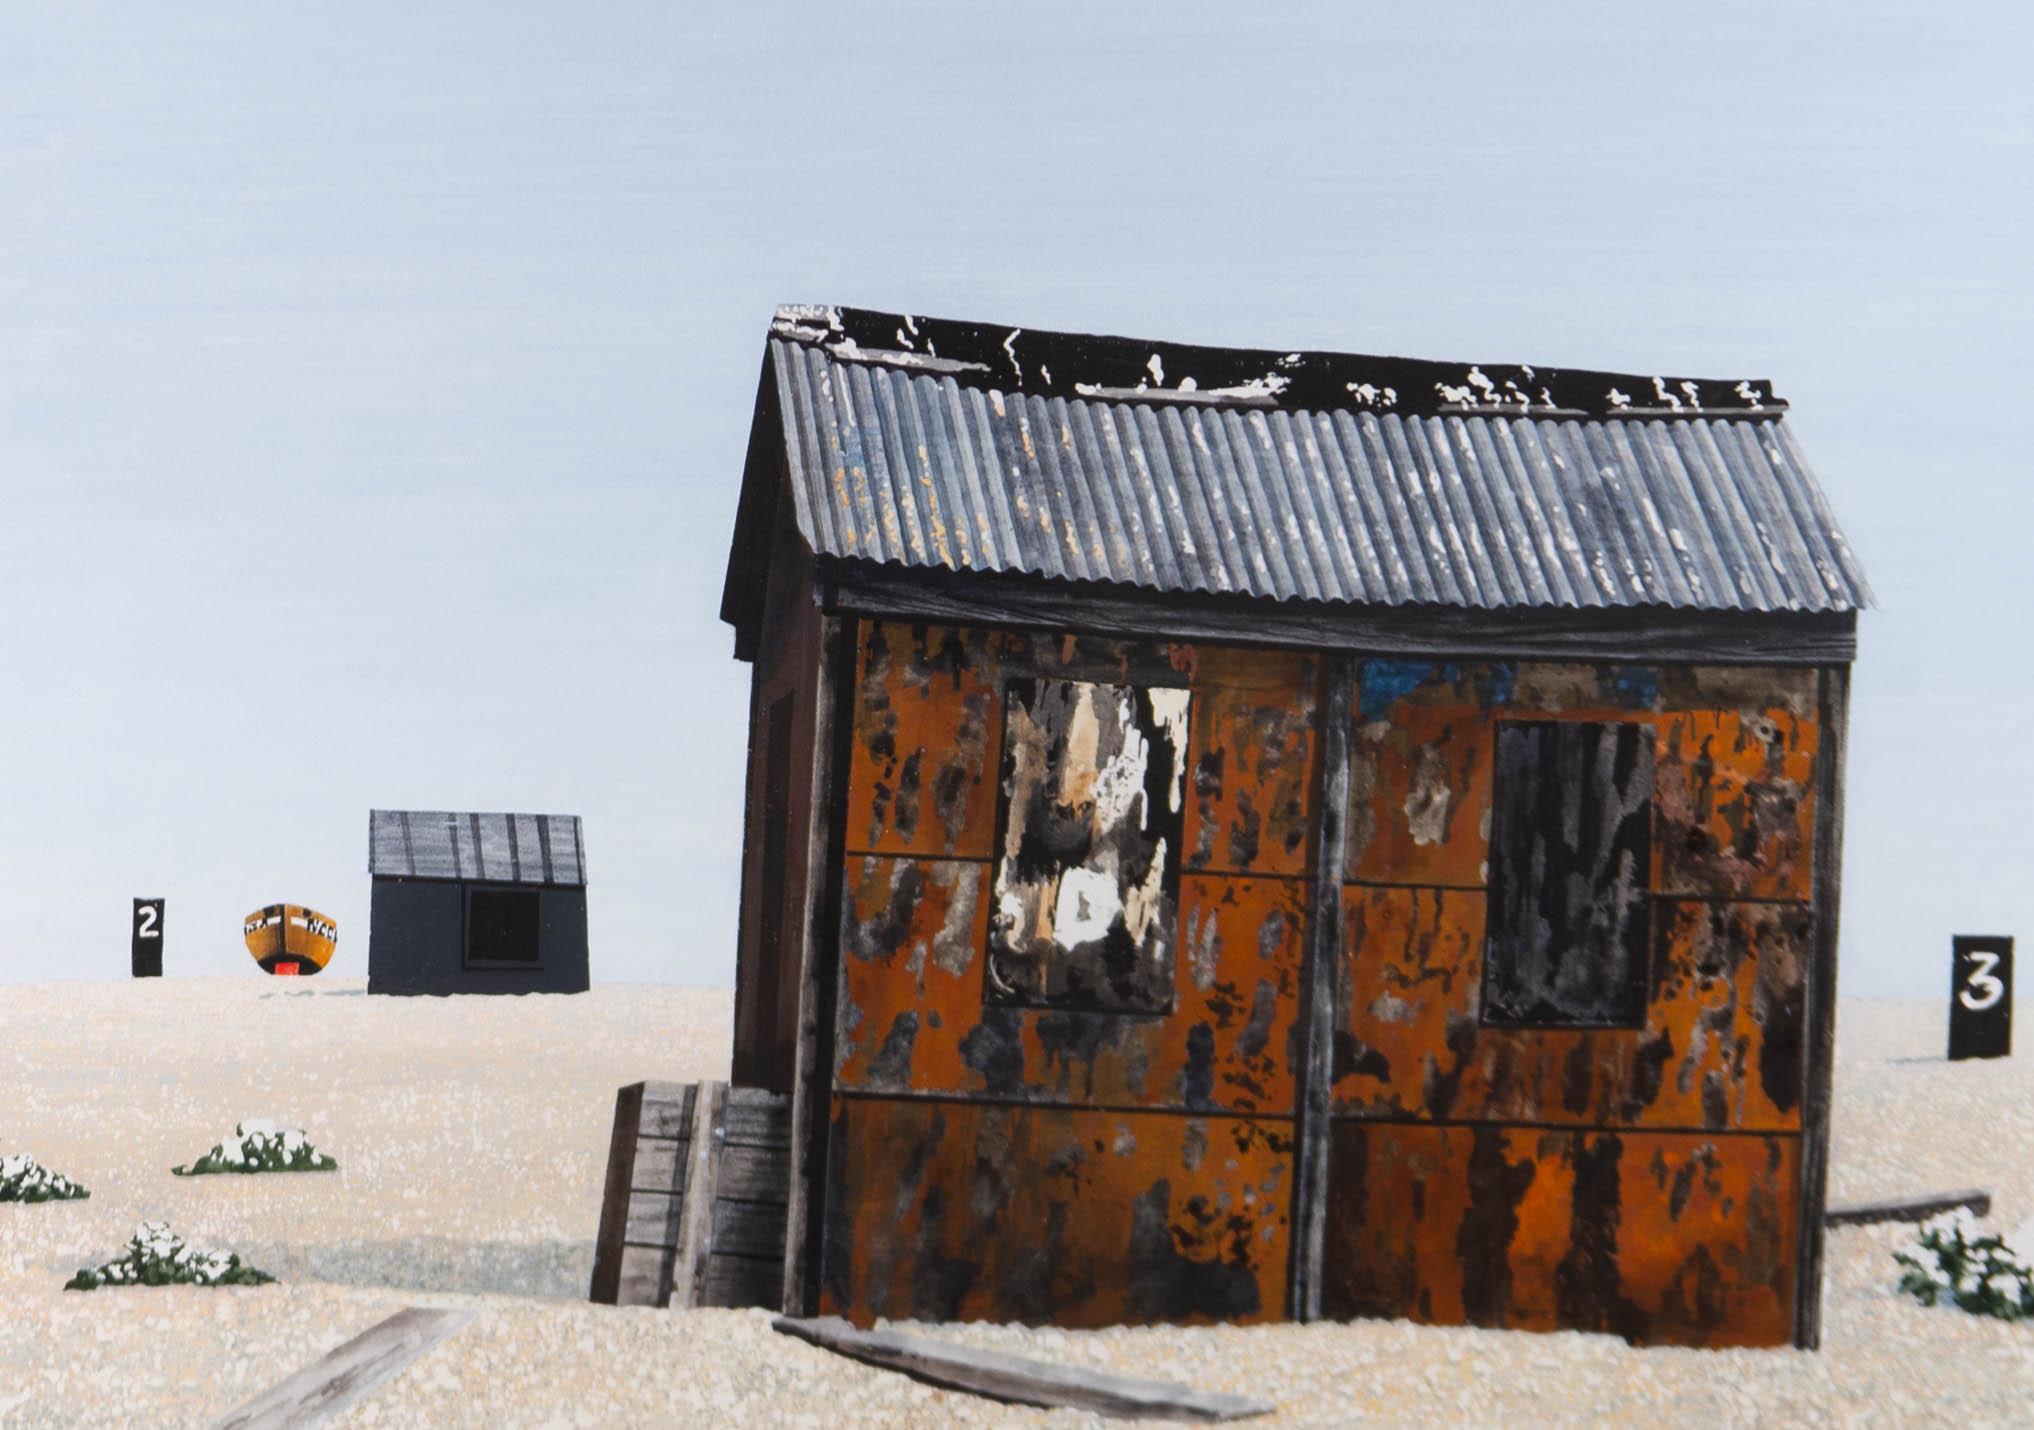 A very fine acrylic painting by the British artist Michael Kidd. The scene depicts a sandy view with a rusty shack as the main subject. Known for his surreal, quirky and creative paintings, this work is illustrative of the artist's imagination, as